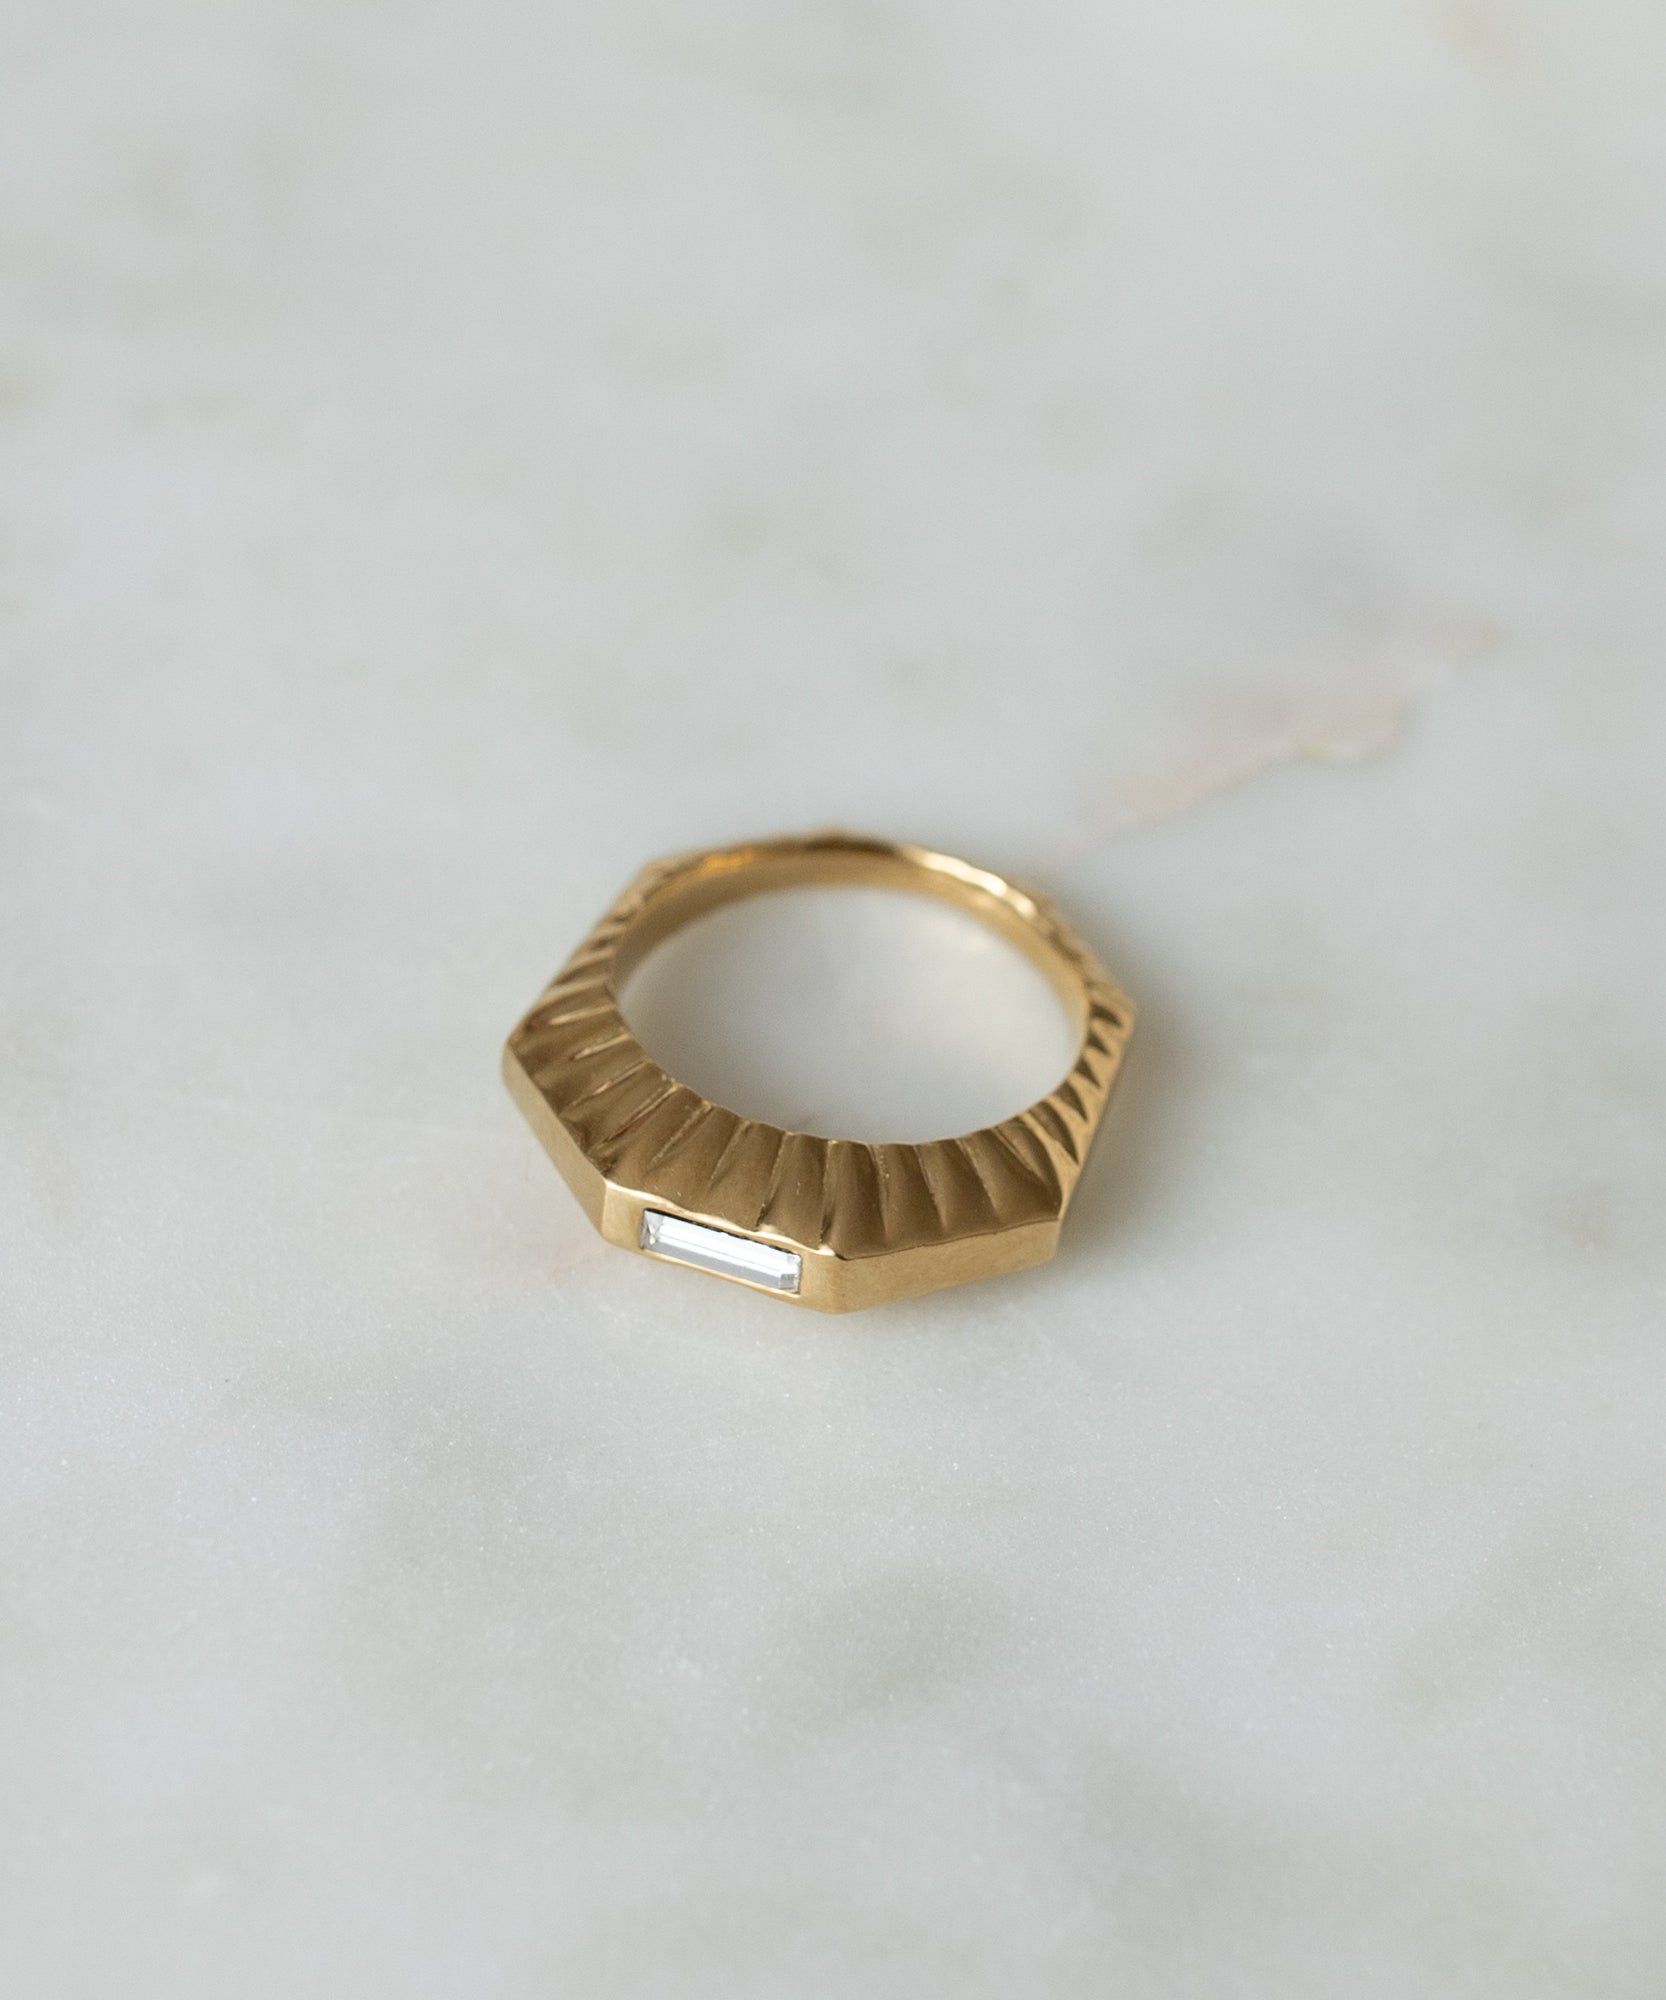 WALD Berlin Shining Star Gold Ring with a textured surface and a single rectangular gemstone, resting on a marble surface.